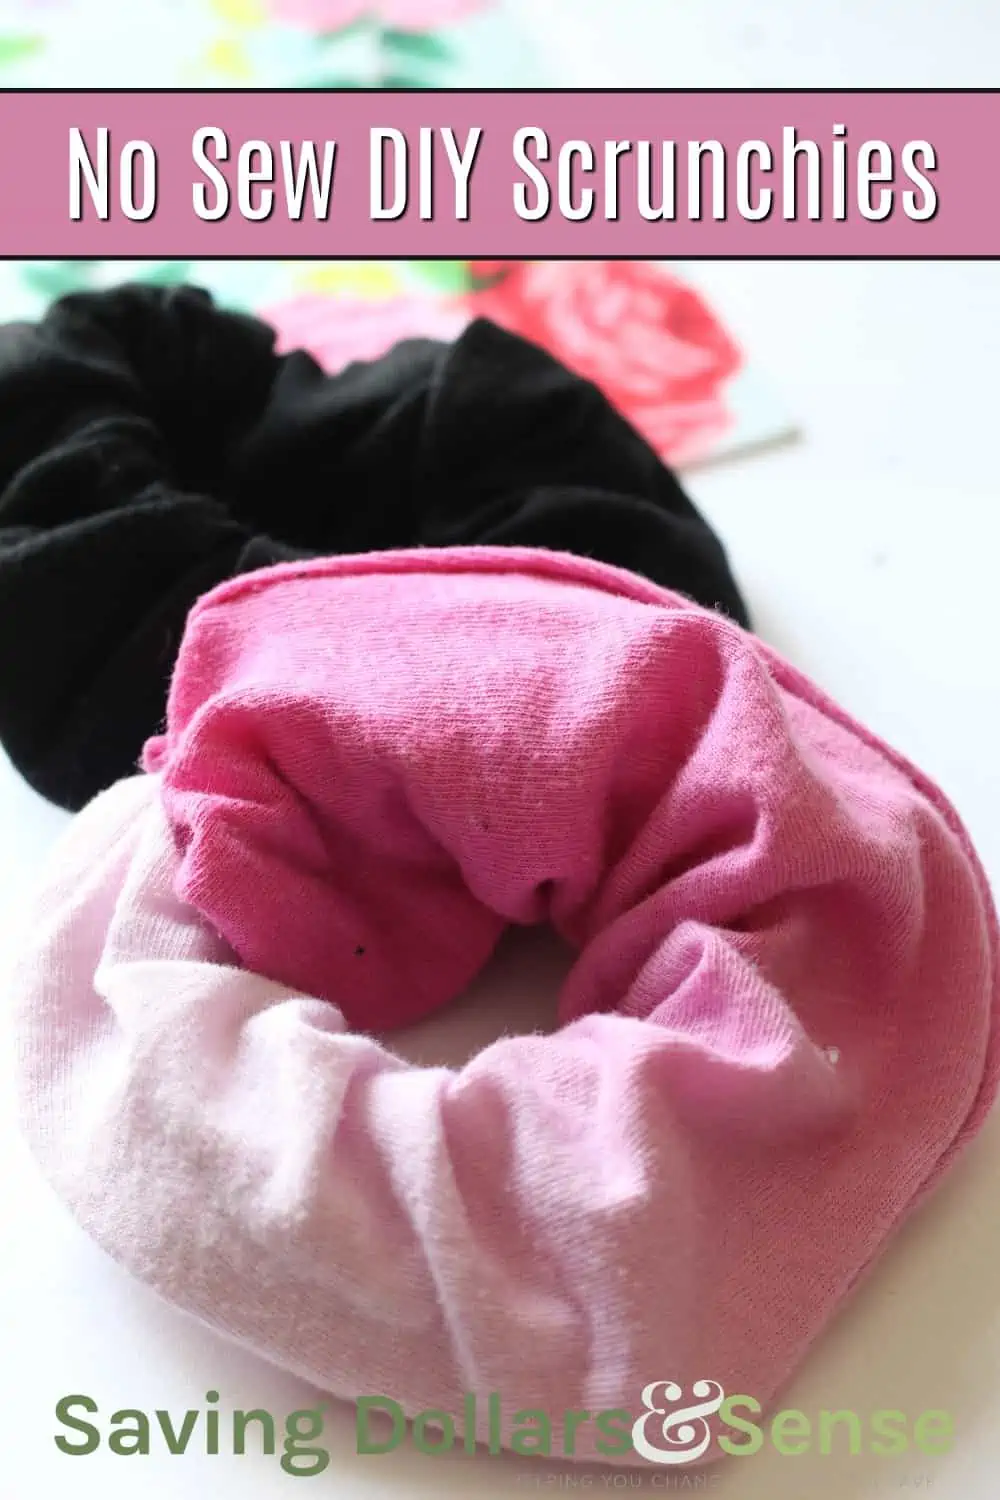 How to Make Scrunchies No Sew Instructions Using Recycled T-Shirts